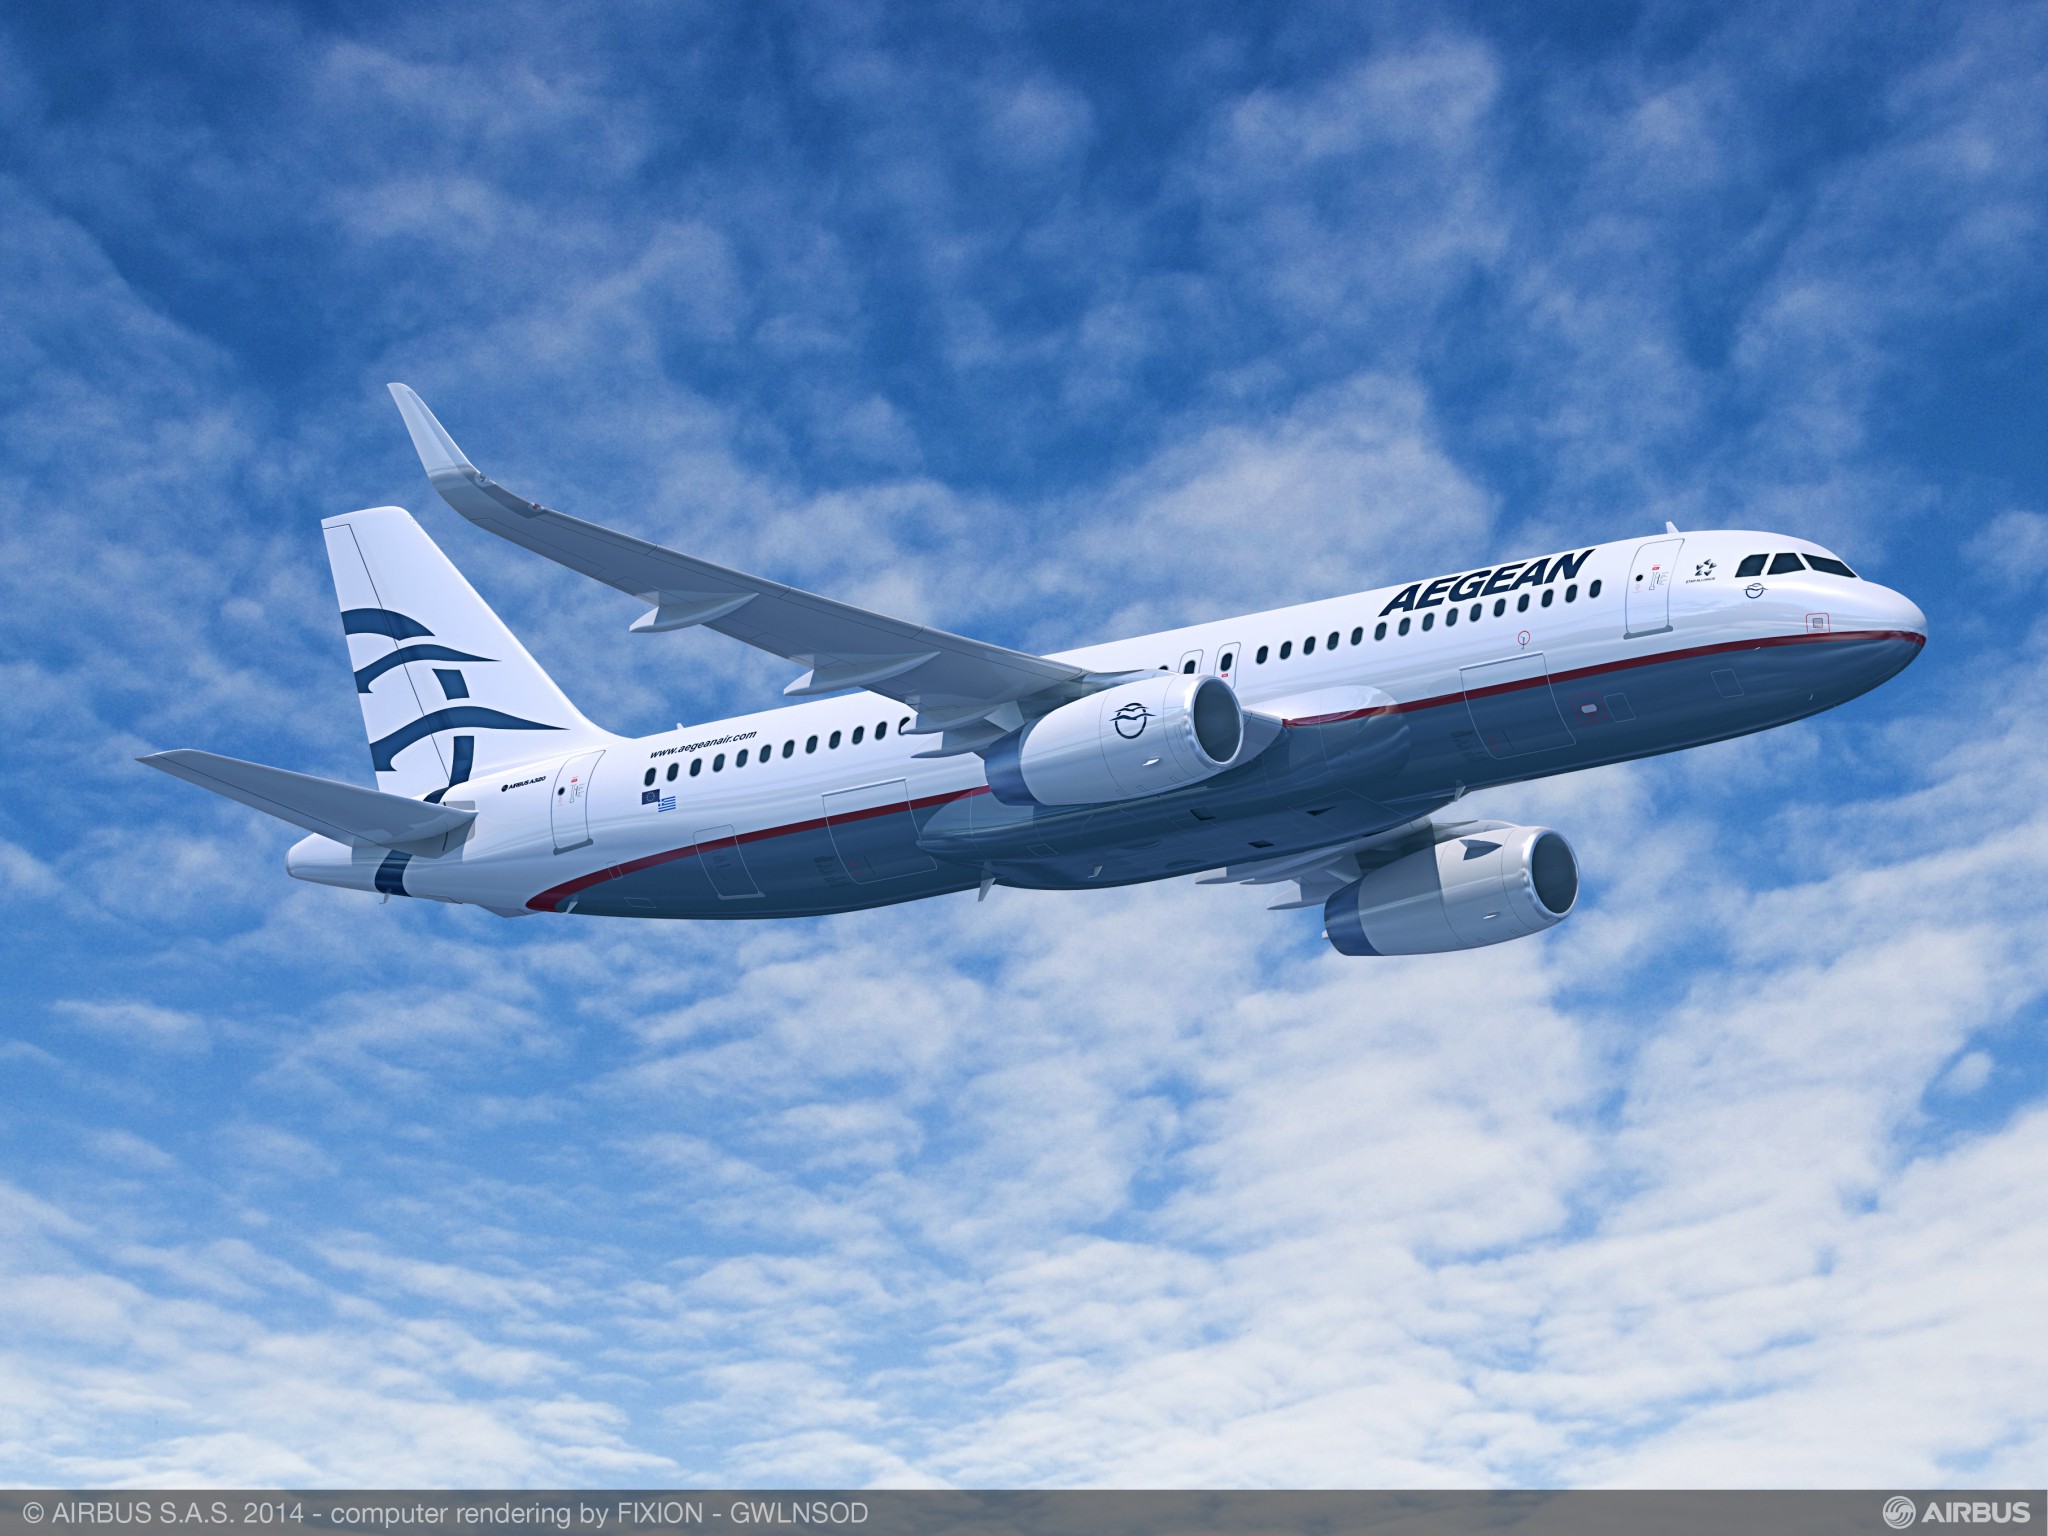 Aegean Airlines H12016 net loss